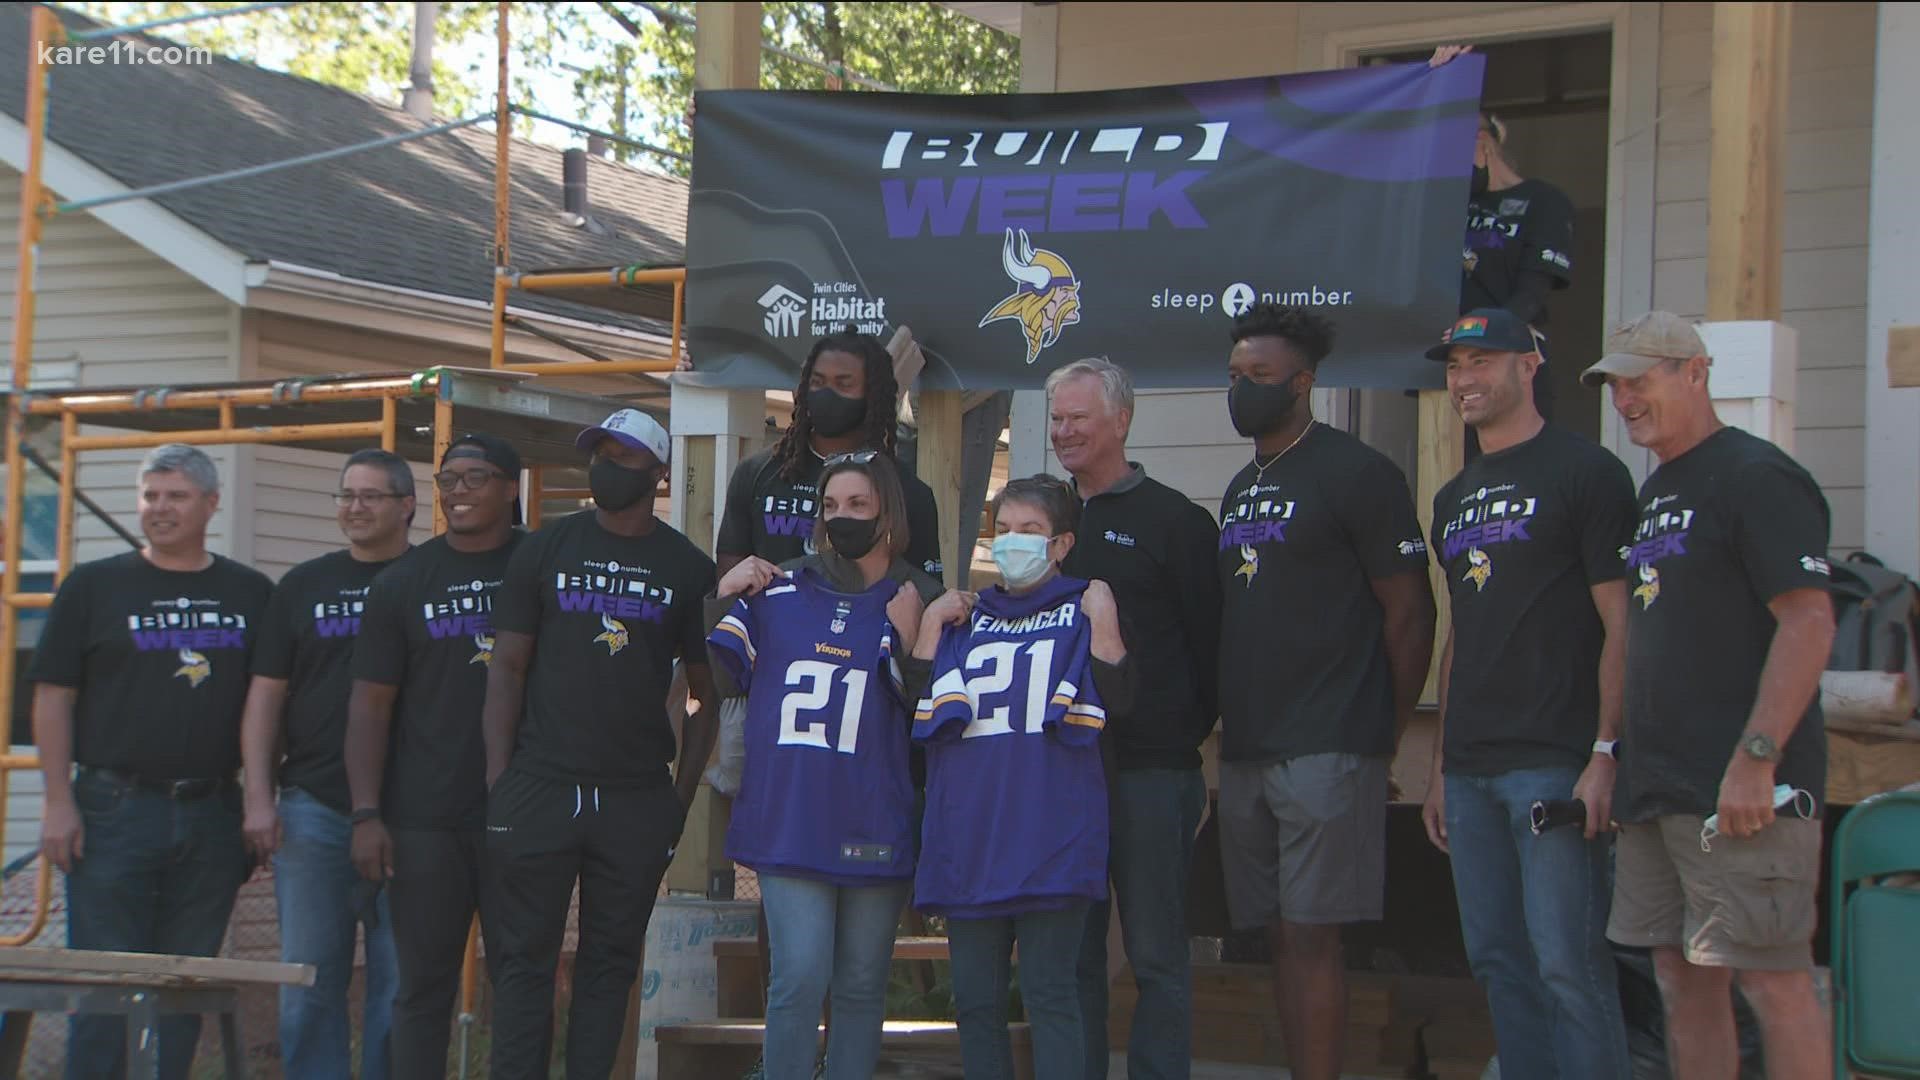 Alexander, who said he grew up in a Habitat for Humanity house as a kid in Florida, joined other teammates to help build a house for a Minneapolis family.